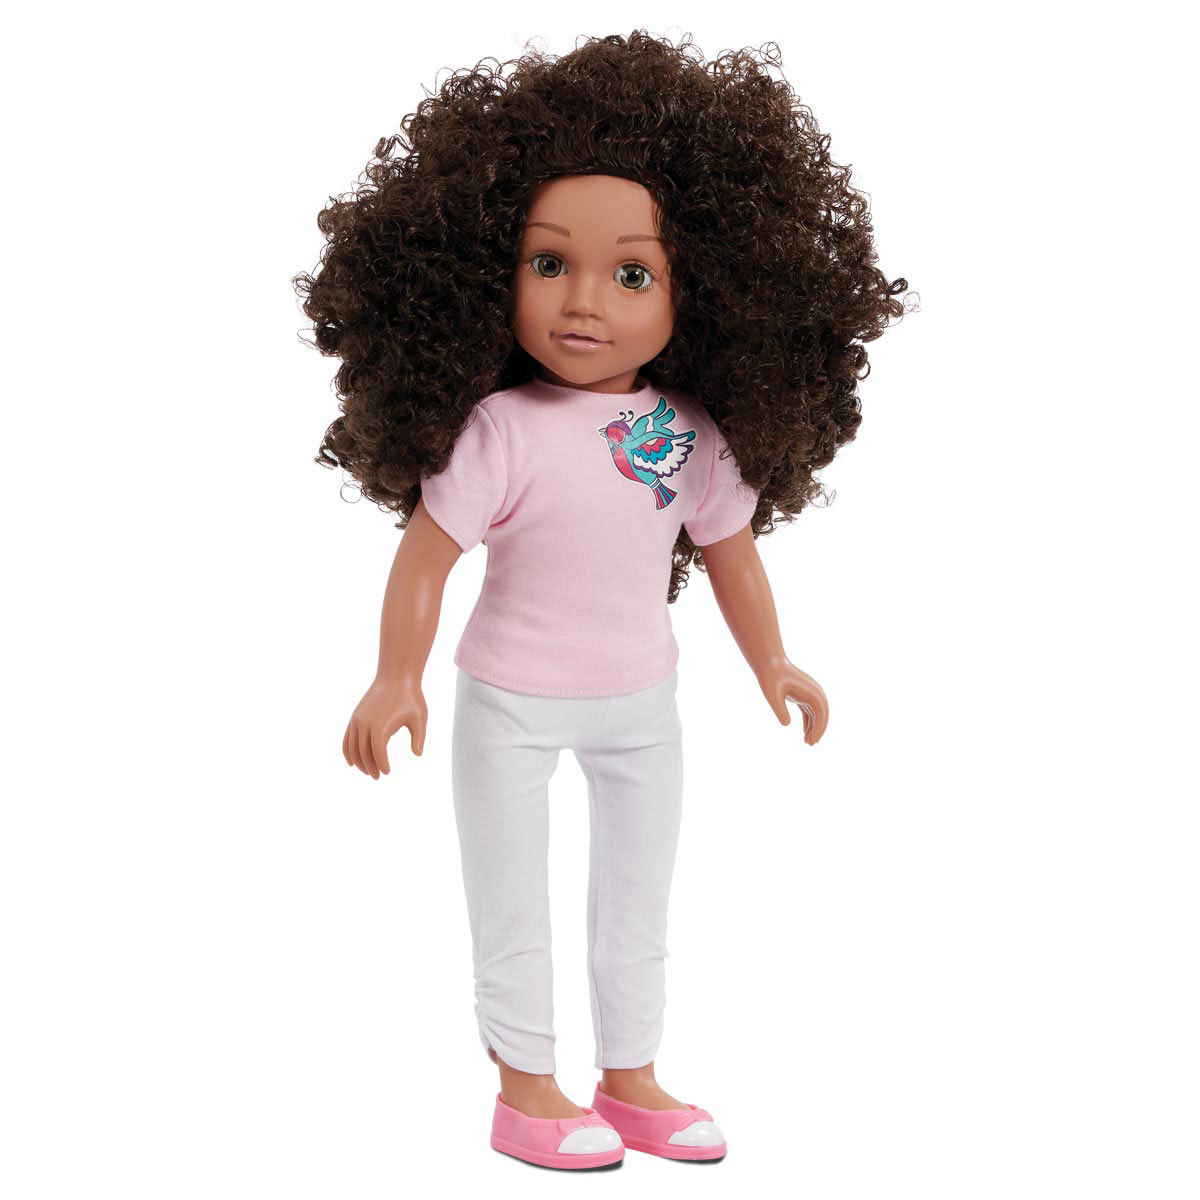 Rfriends 46cm Doll - Mia | The Entertainer